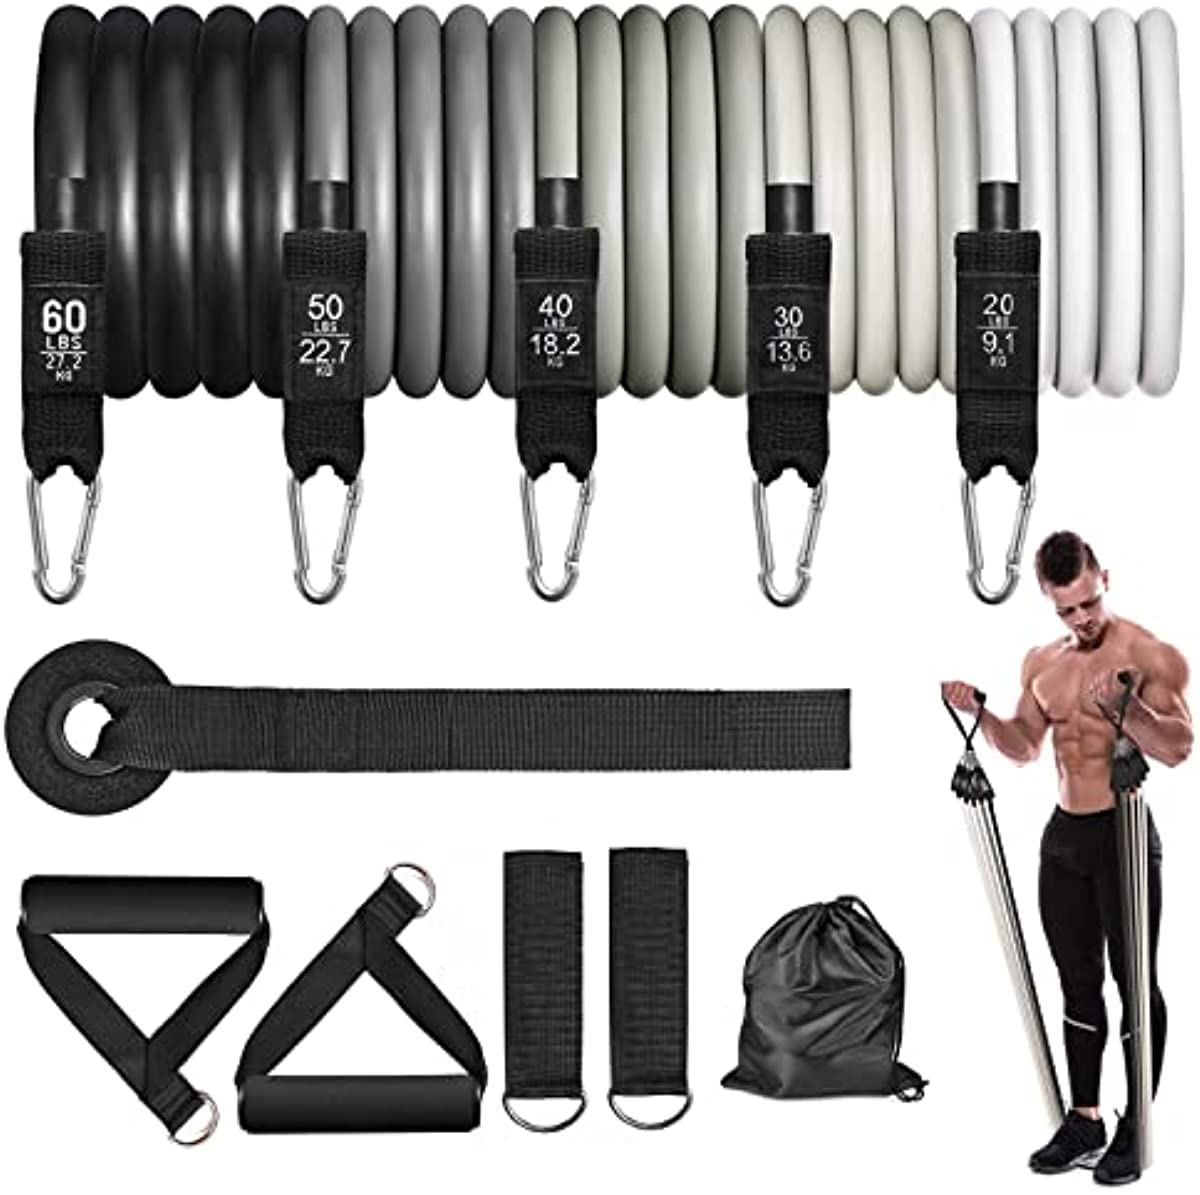 Heavy Resistance Bands Set, Workout Bands, Exercise Bands with Door Anchor, Handles, Legs & Ankle Straps, Carry Bag, Perfect for Heavy Duty Strength Training